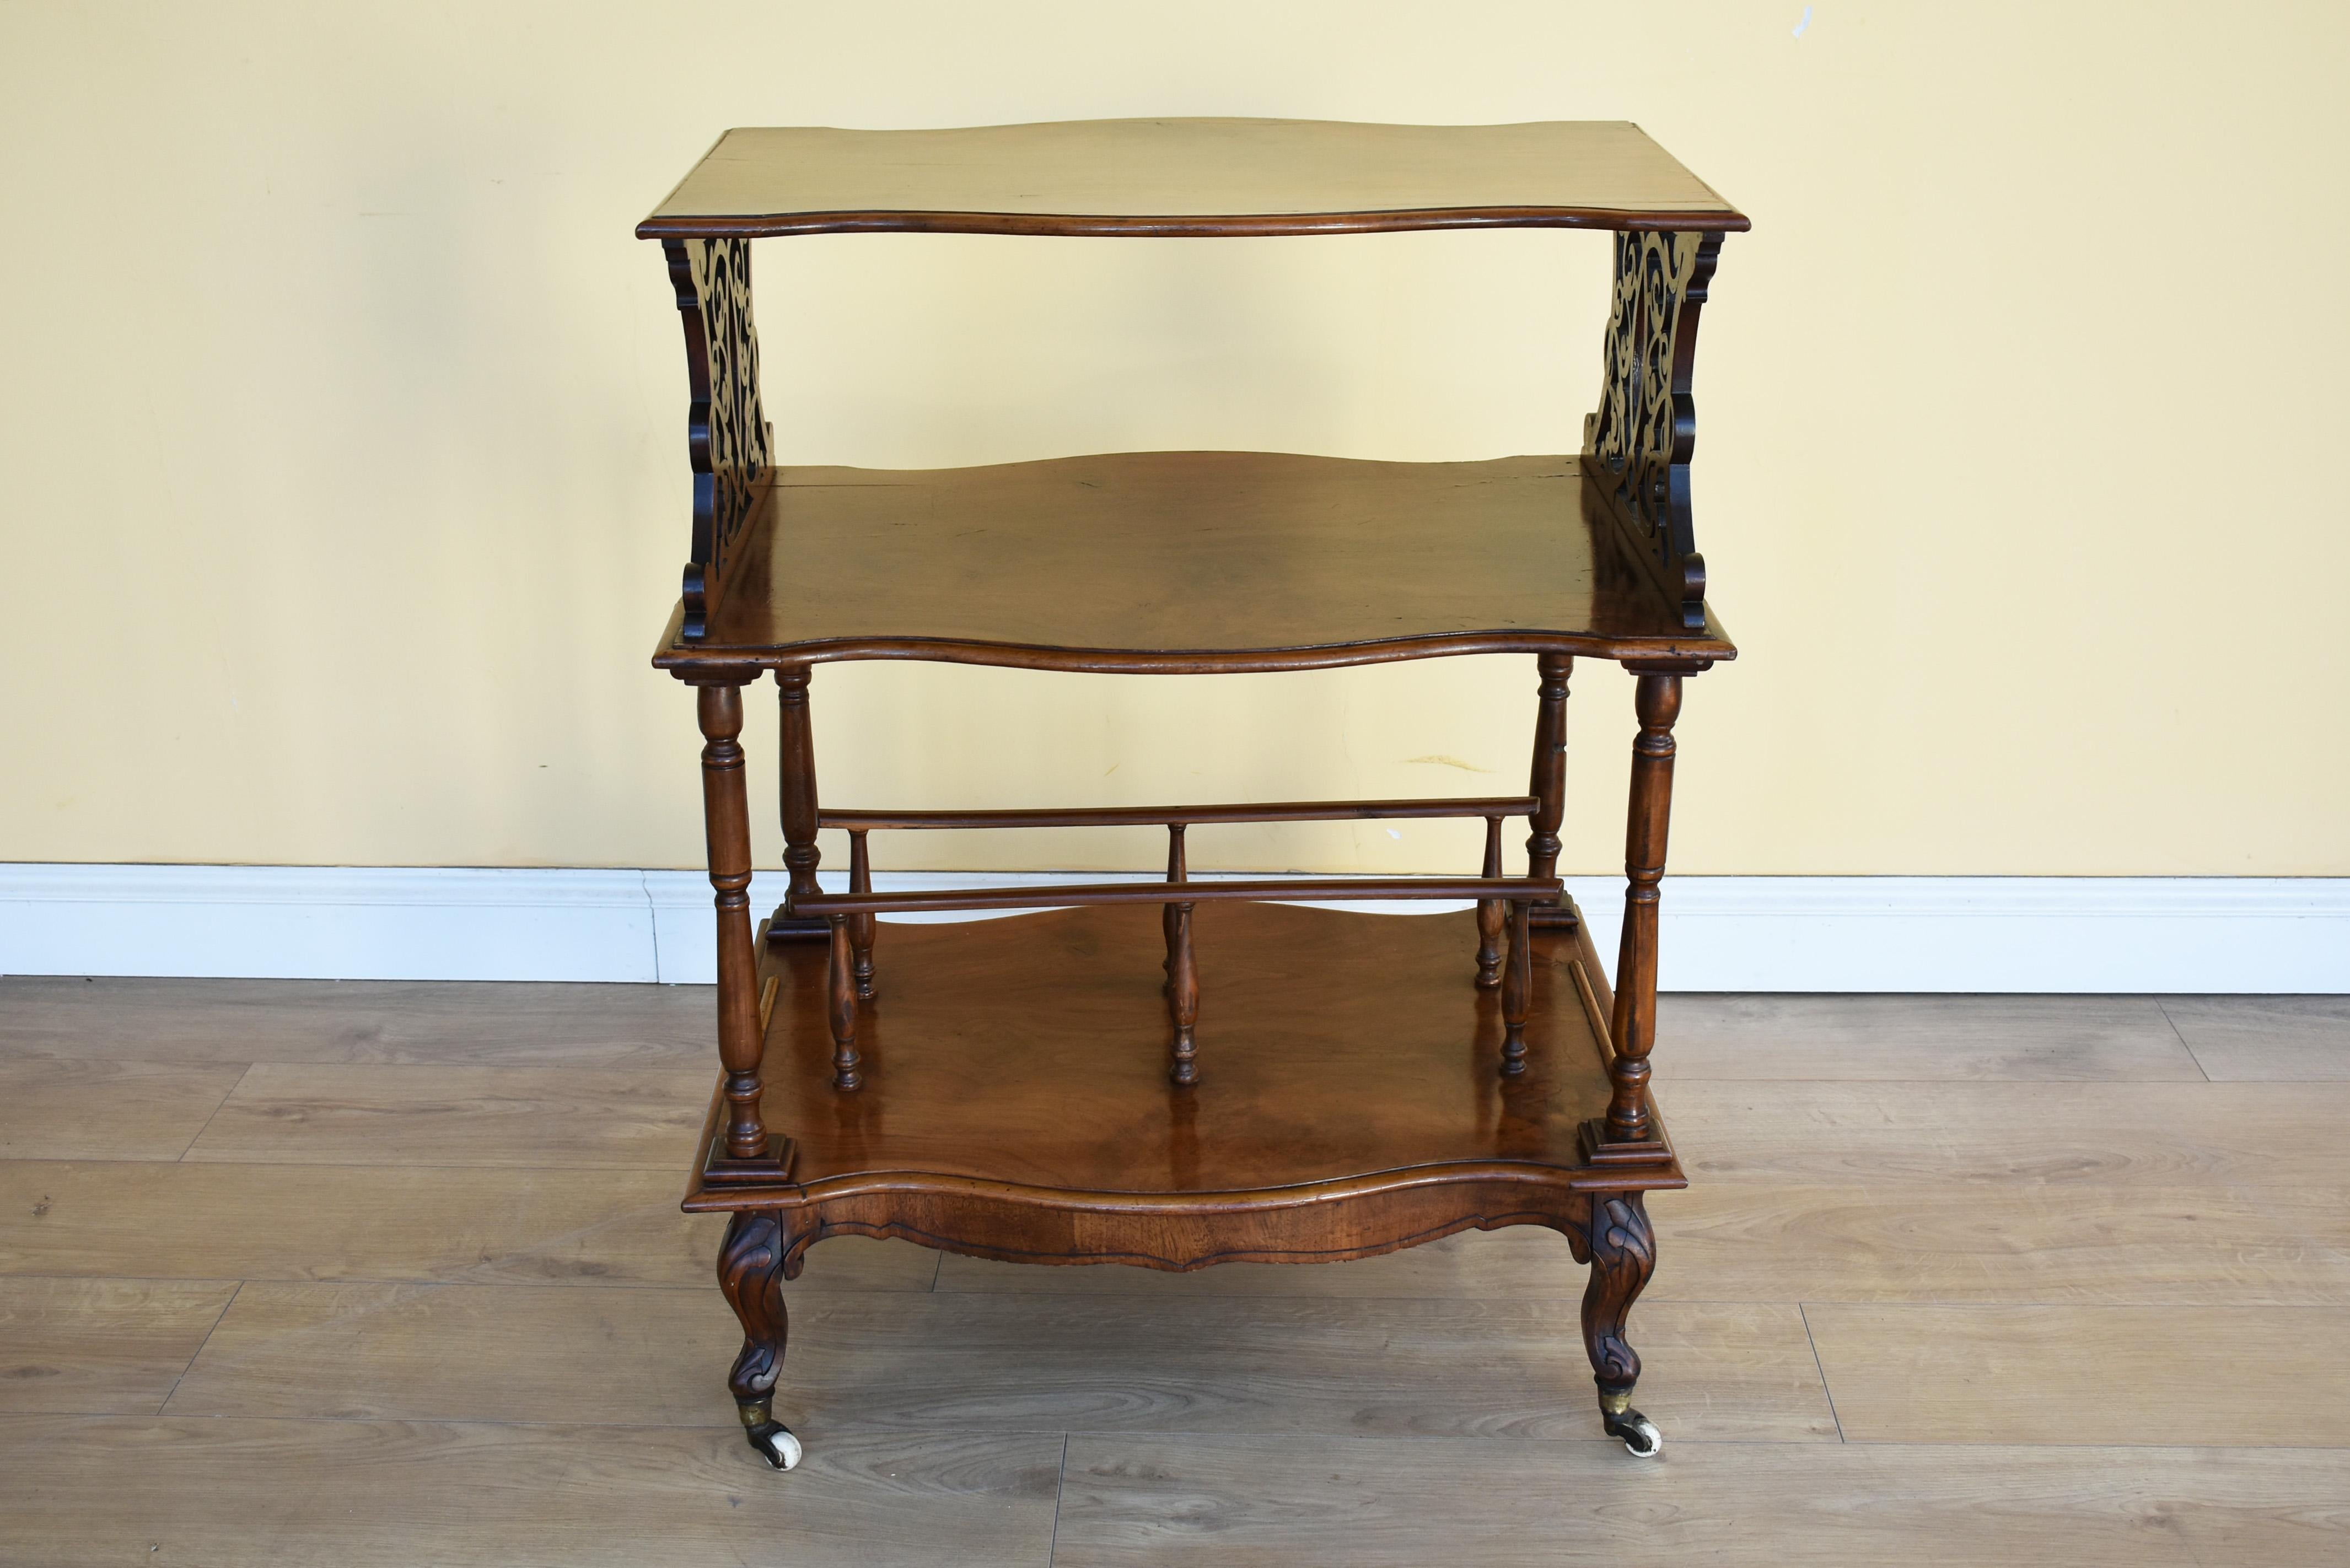 For sale is a good quality Victorian walnut what not, have a serpentine shaped top, supported by fretwork supports with a shelf below. Underneath this there is another shelf with two divisions, standing on small cabriol legs terminating on castors.